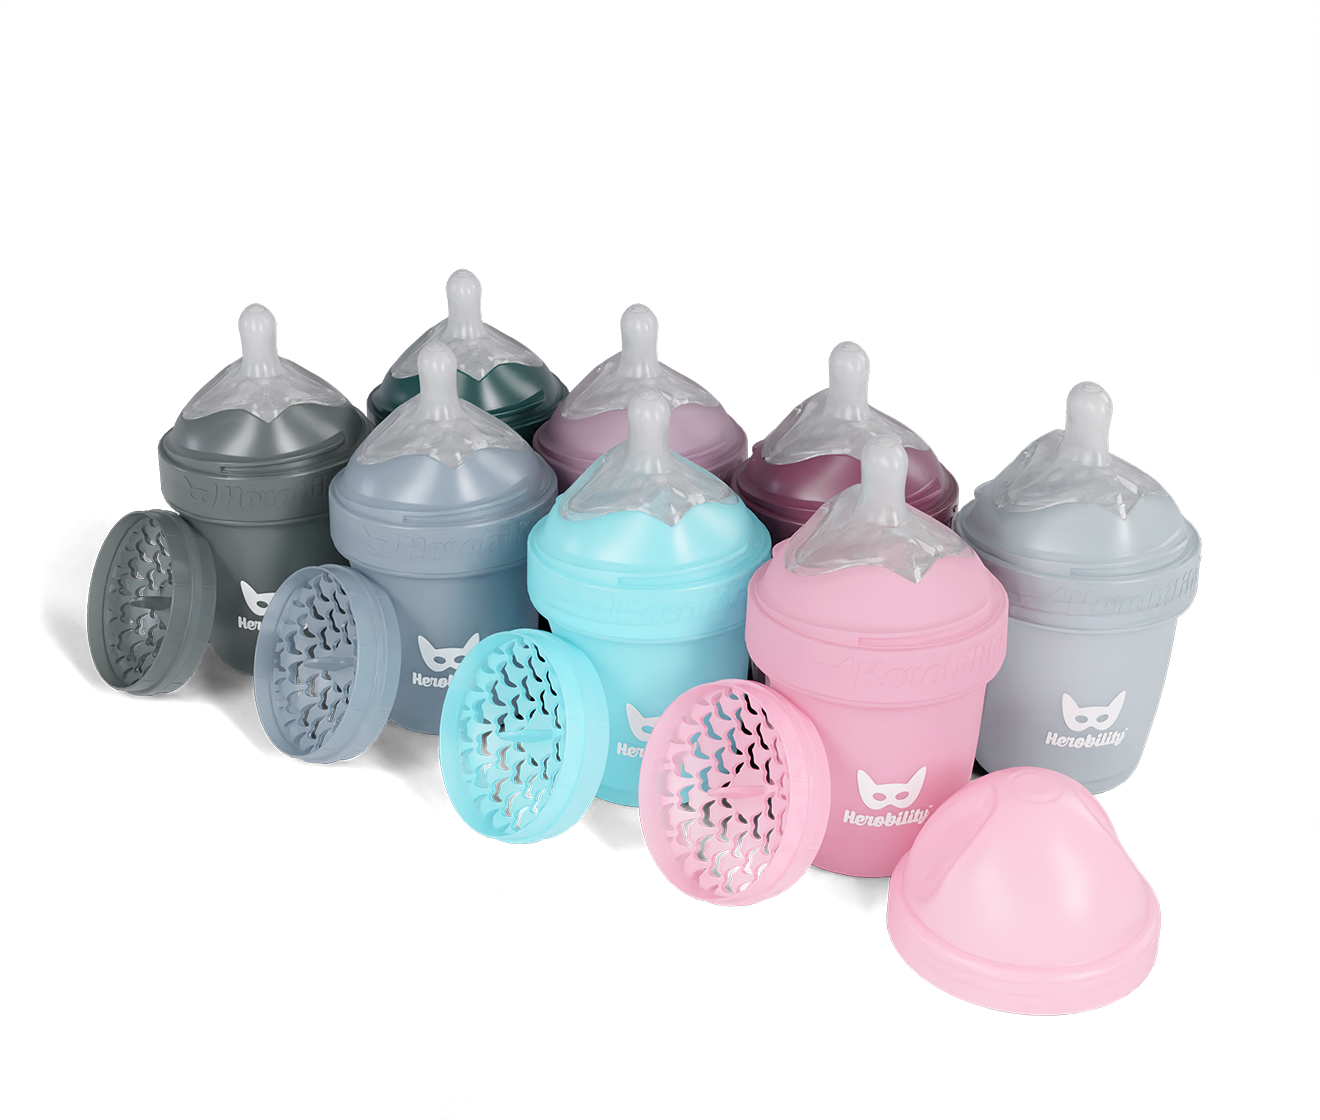 8-pack LT 140ml/5 floz baby bottles with 70% discount